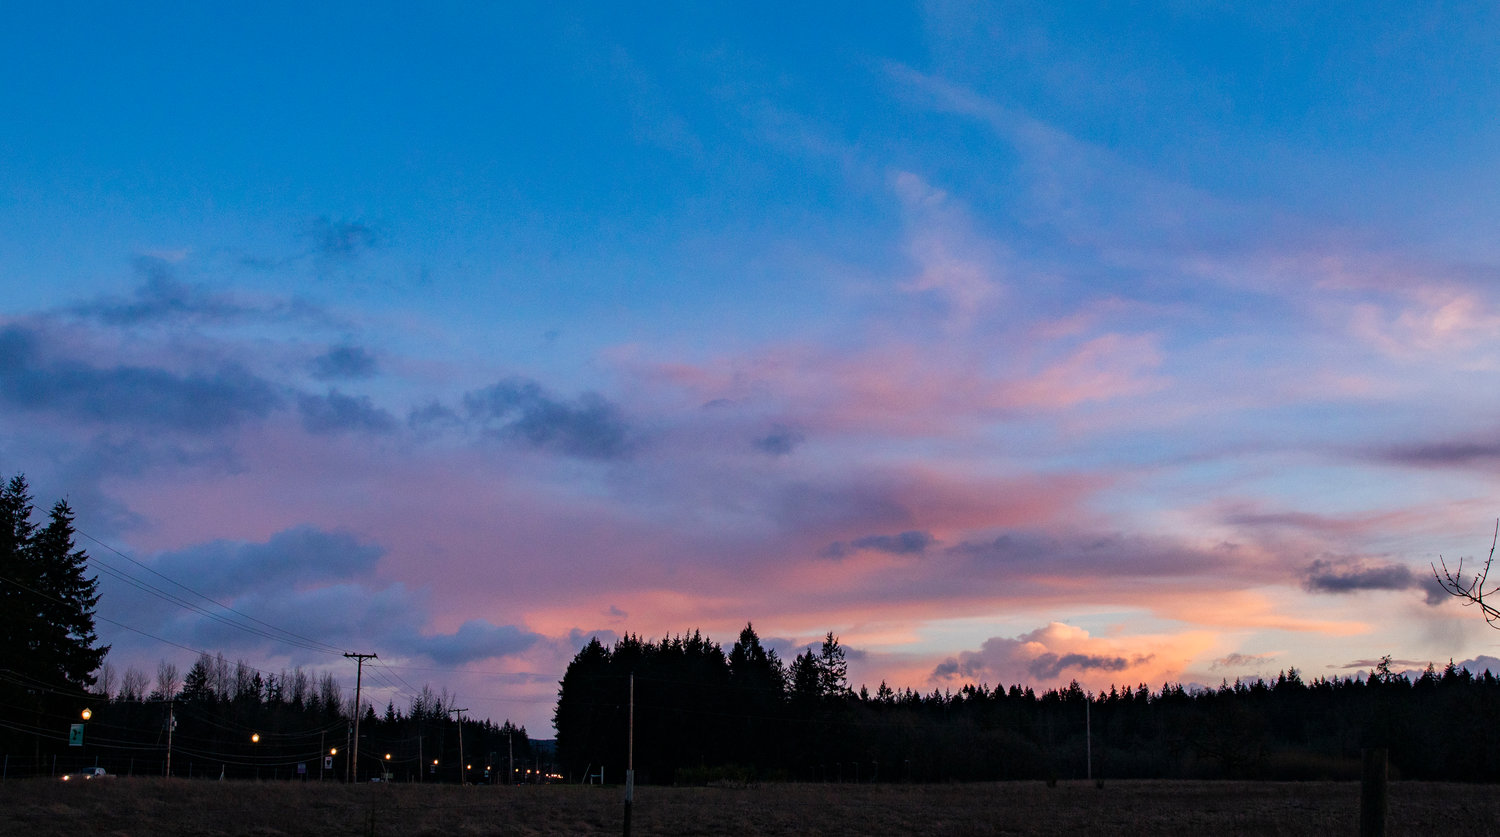 At the county line between Grays Harbor and Thurston counties on Saturday at sunset, clouds cast colors over streetlights.